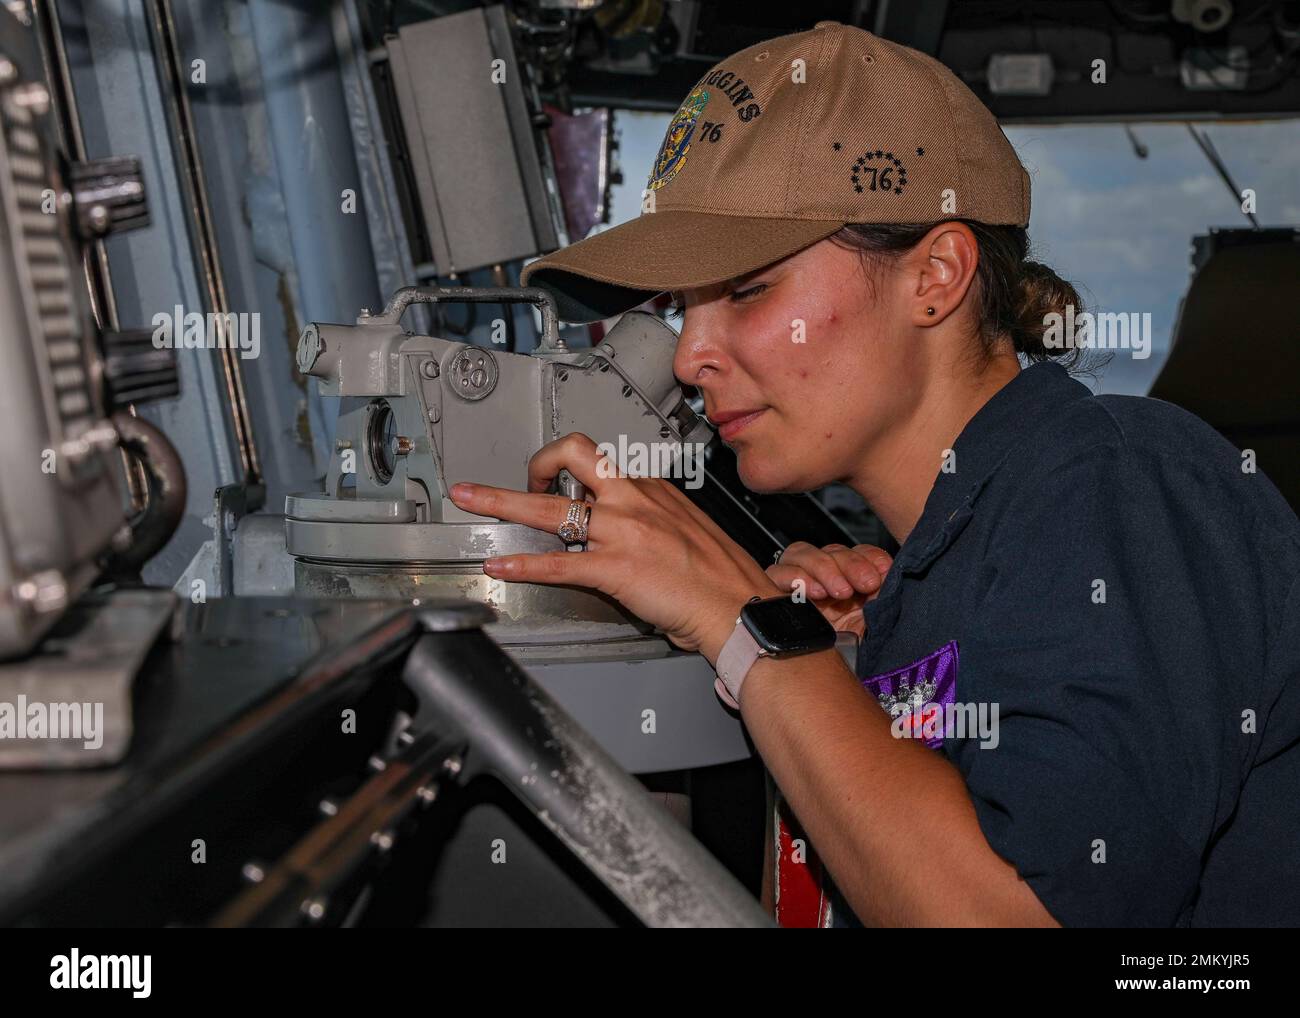 SOUTH CHINA SEA (Sept. 12, 2022) Ensign Jackie Wrage, from New Port Richey, Florida, uses a telescopic alidade located on the bridge aboard Arleigh Burke-class guided-missile destroyer USS Higgins (DDG 76) while conducting a replenishment-at-sea in the South China Sea, Sept. 12. Higgins is assigned to Commander, Task Force 71/Destroyer Squadron (DESRON) 15, the Navy's largest forward-deployed DESRON and the U.S. 7th fleet's principal surface force. Stock Photo